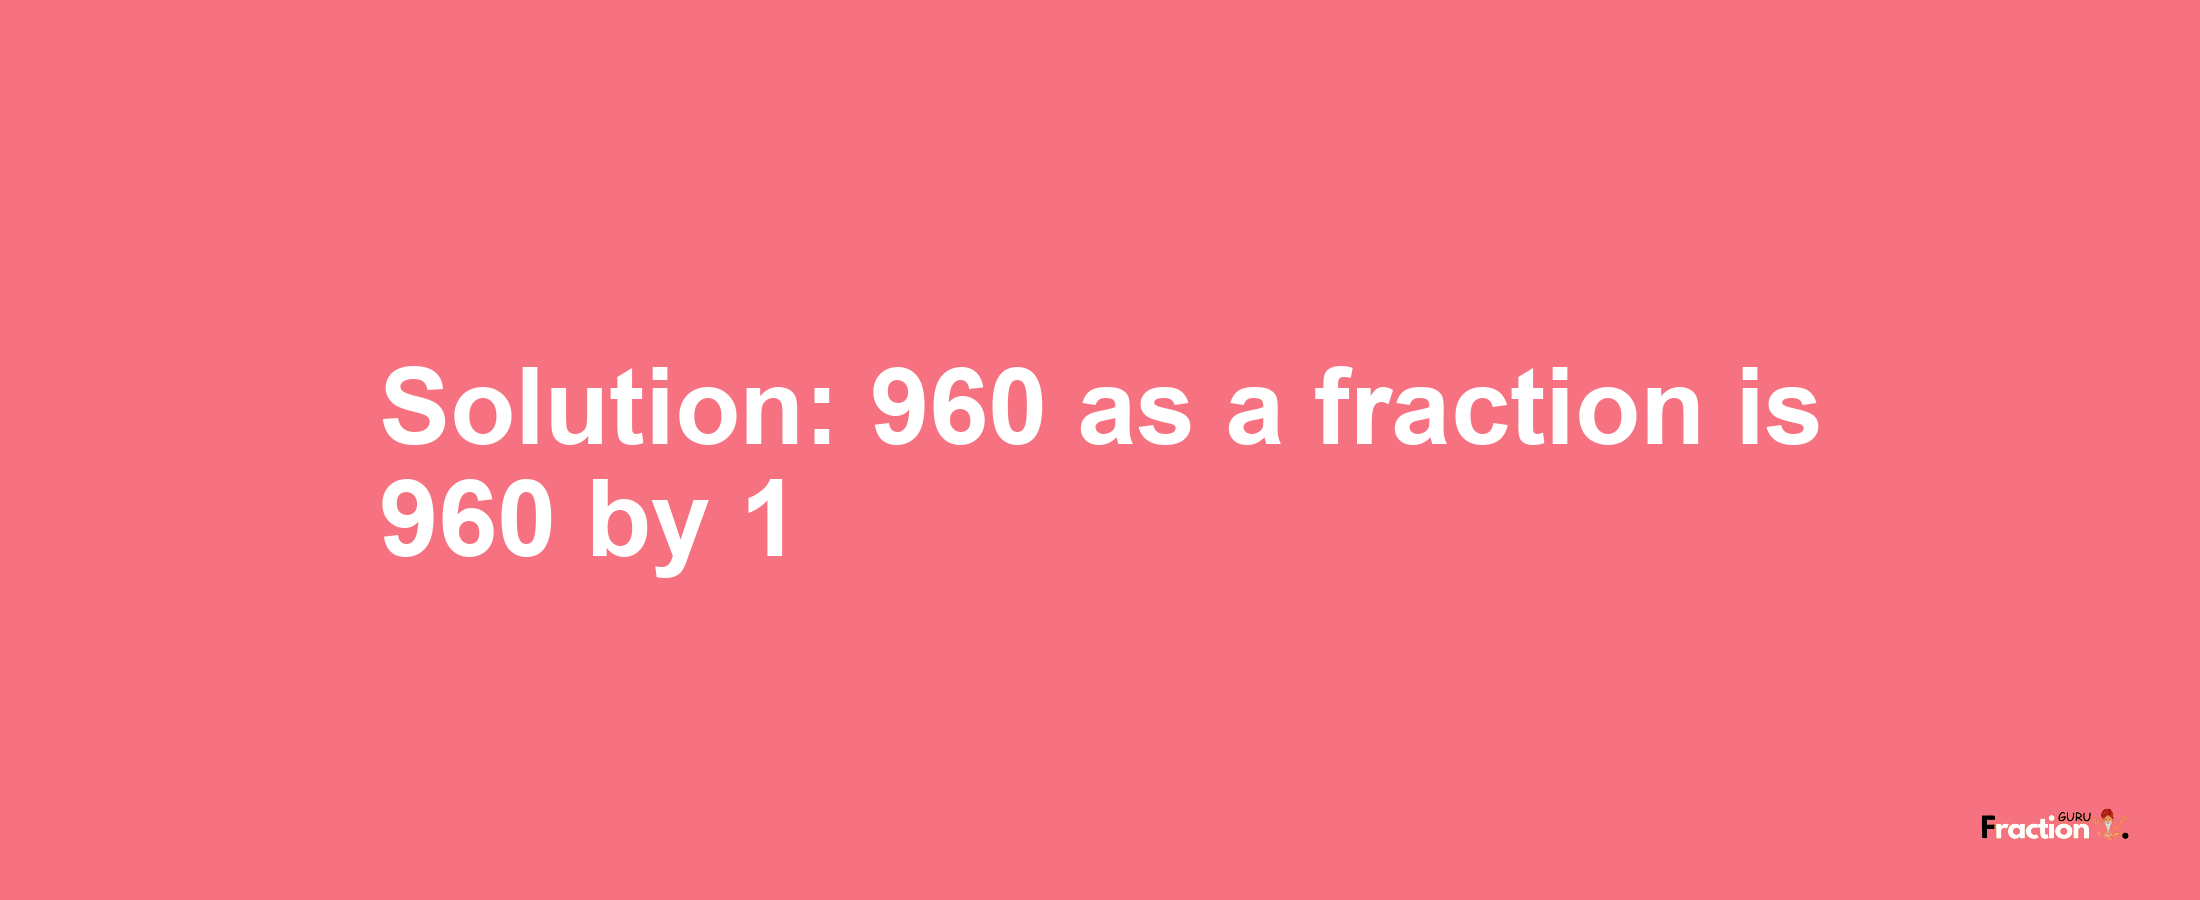 Solution:960 as a fraction is 960/1